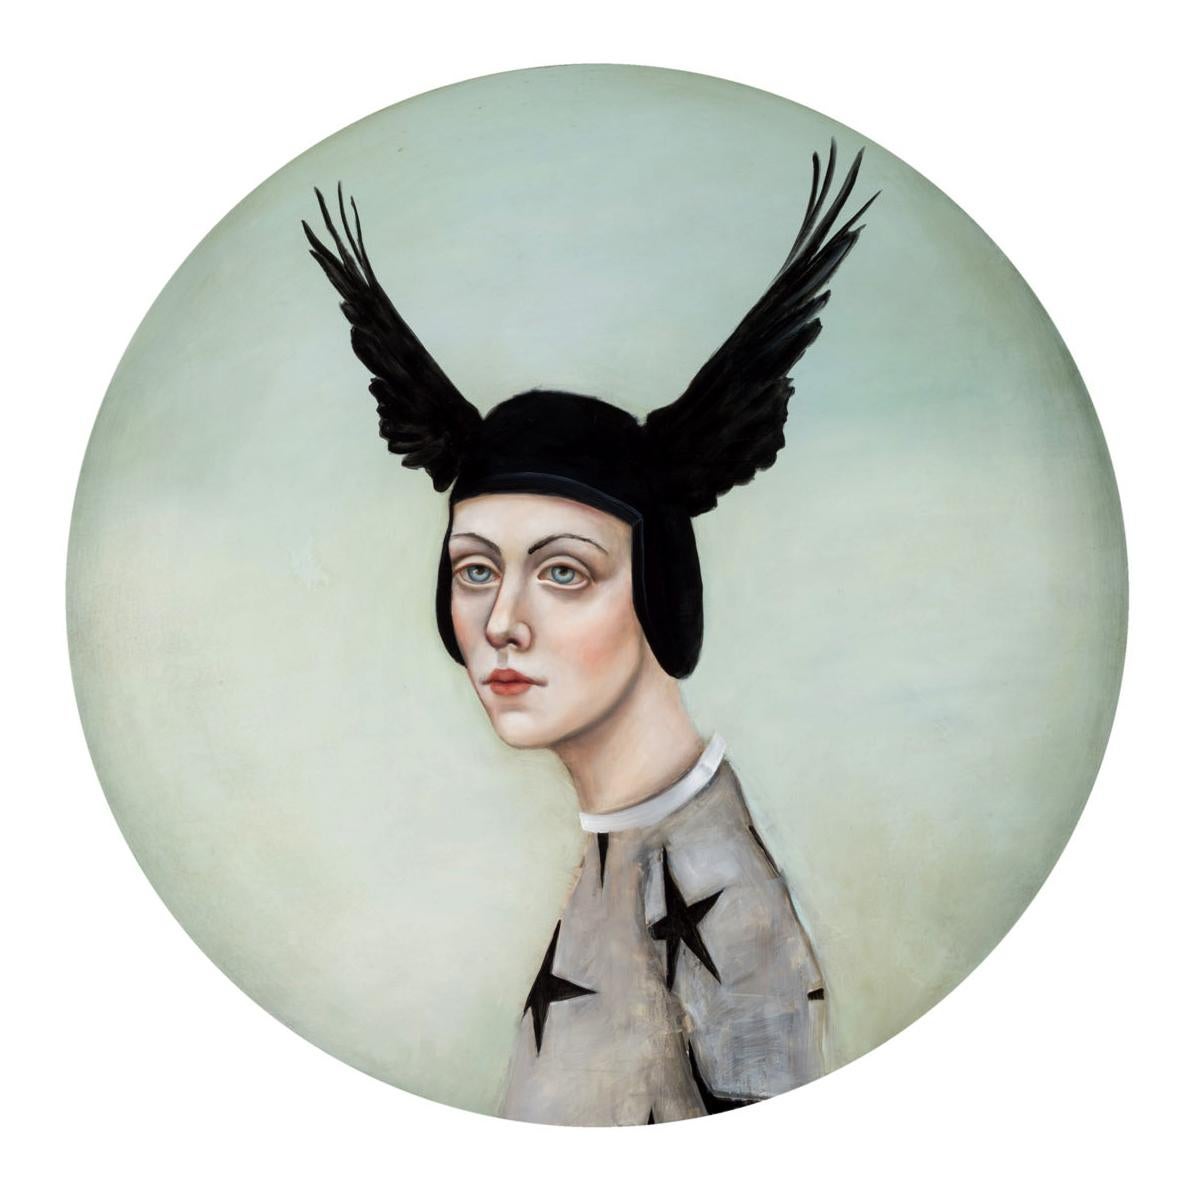 Michele Mikesell Portrait Painting - Shield of Coronis, Round oil on canvas, strong female portrait w wings, realism